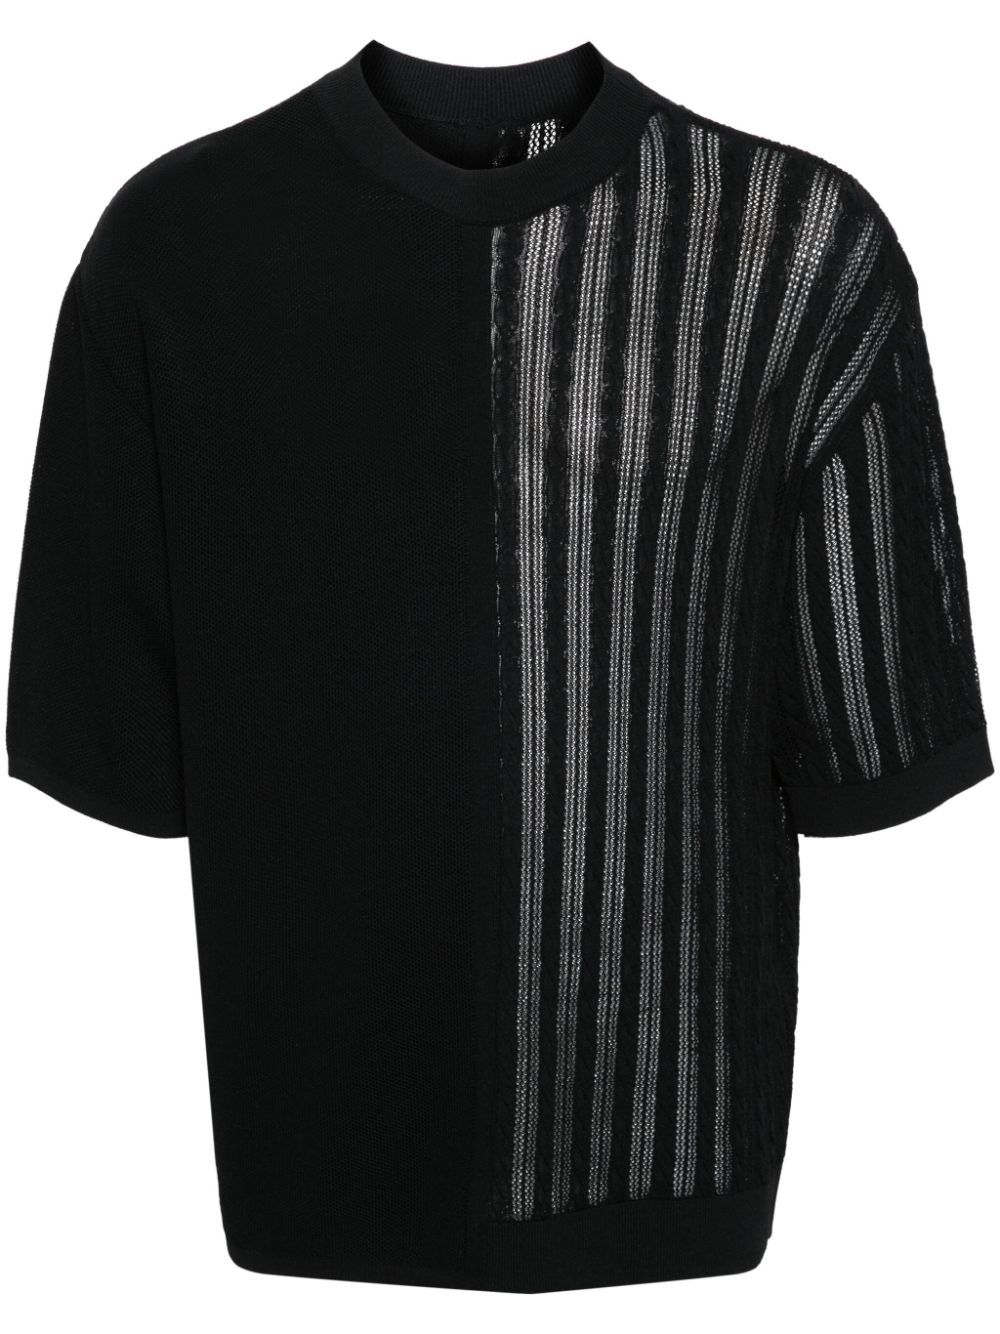 JACQUEMUS LE HAUT JUEGO KNITTED T-SHIRT